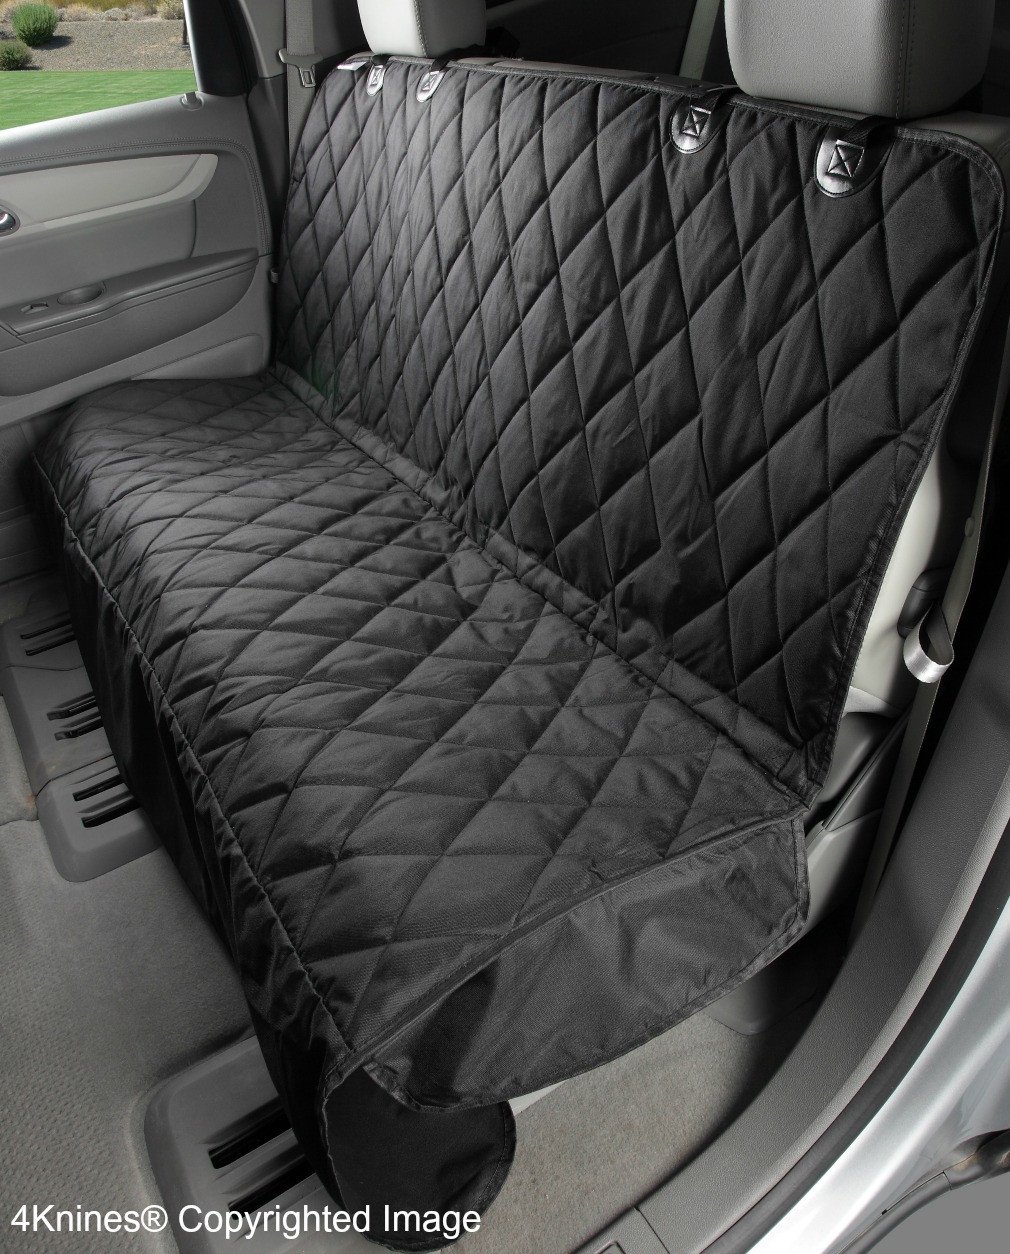 4Knines Dog Seat Cover with Hammock for Full Size Trucks and Large SUVs,  Black, X-Large